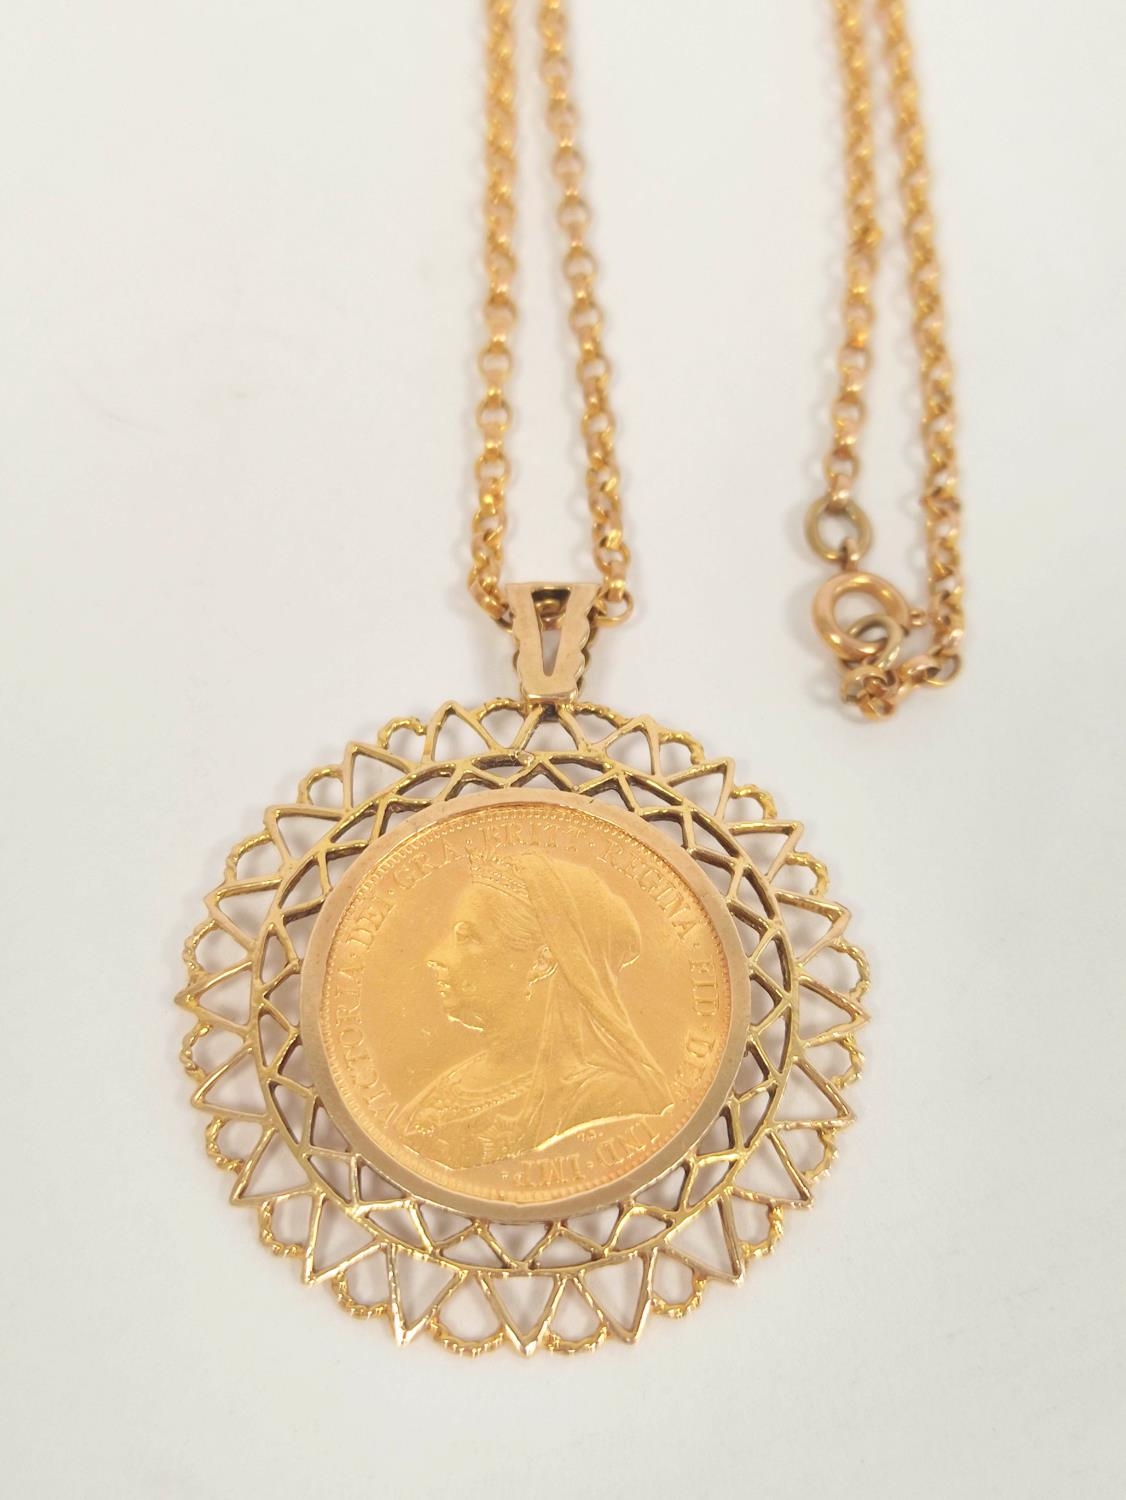 Sovereign 1899, 9ct. gold detachable pendant mount and necklet 54cm, gross 18g. - Image 2 of 5